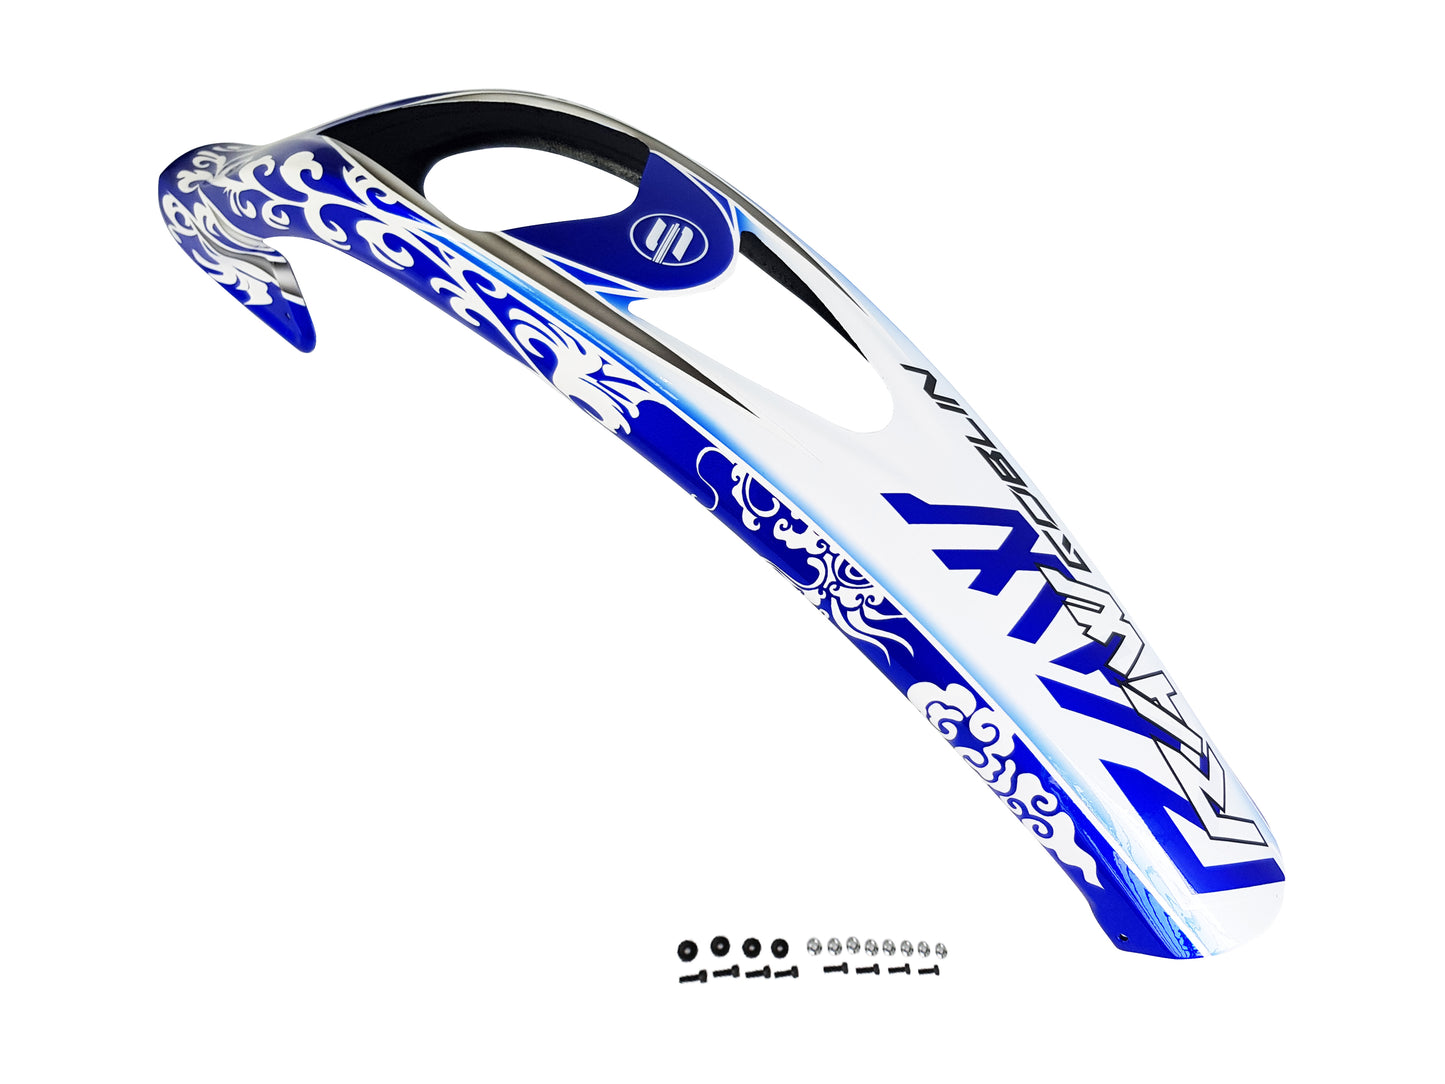 RAW 700 CANOPY AND STICKER ASIAN HERITAGE EDITION WHITE/BLUE (H1346-S-WB)